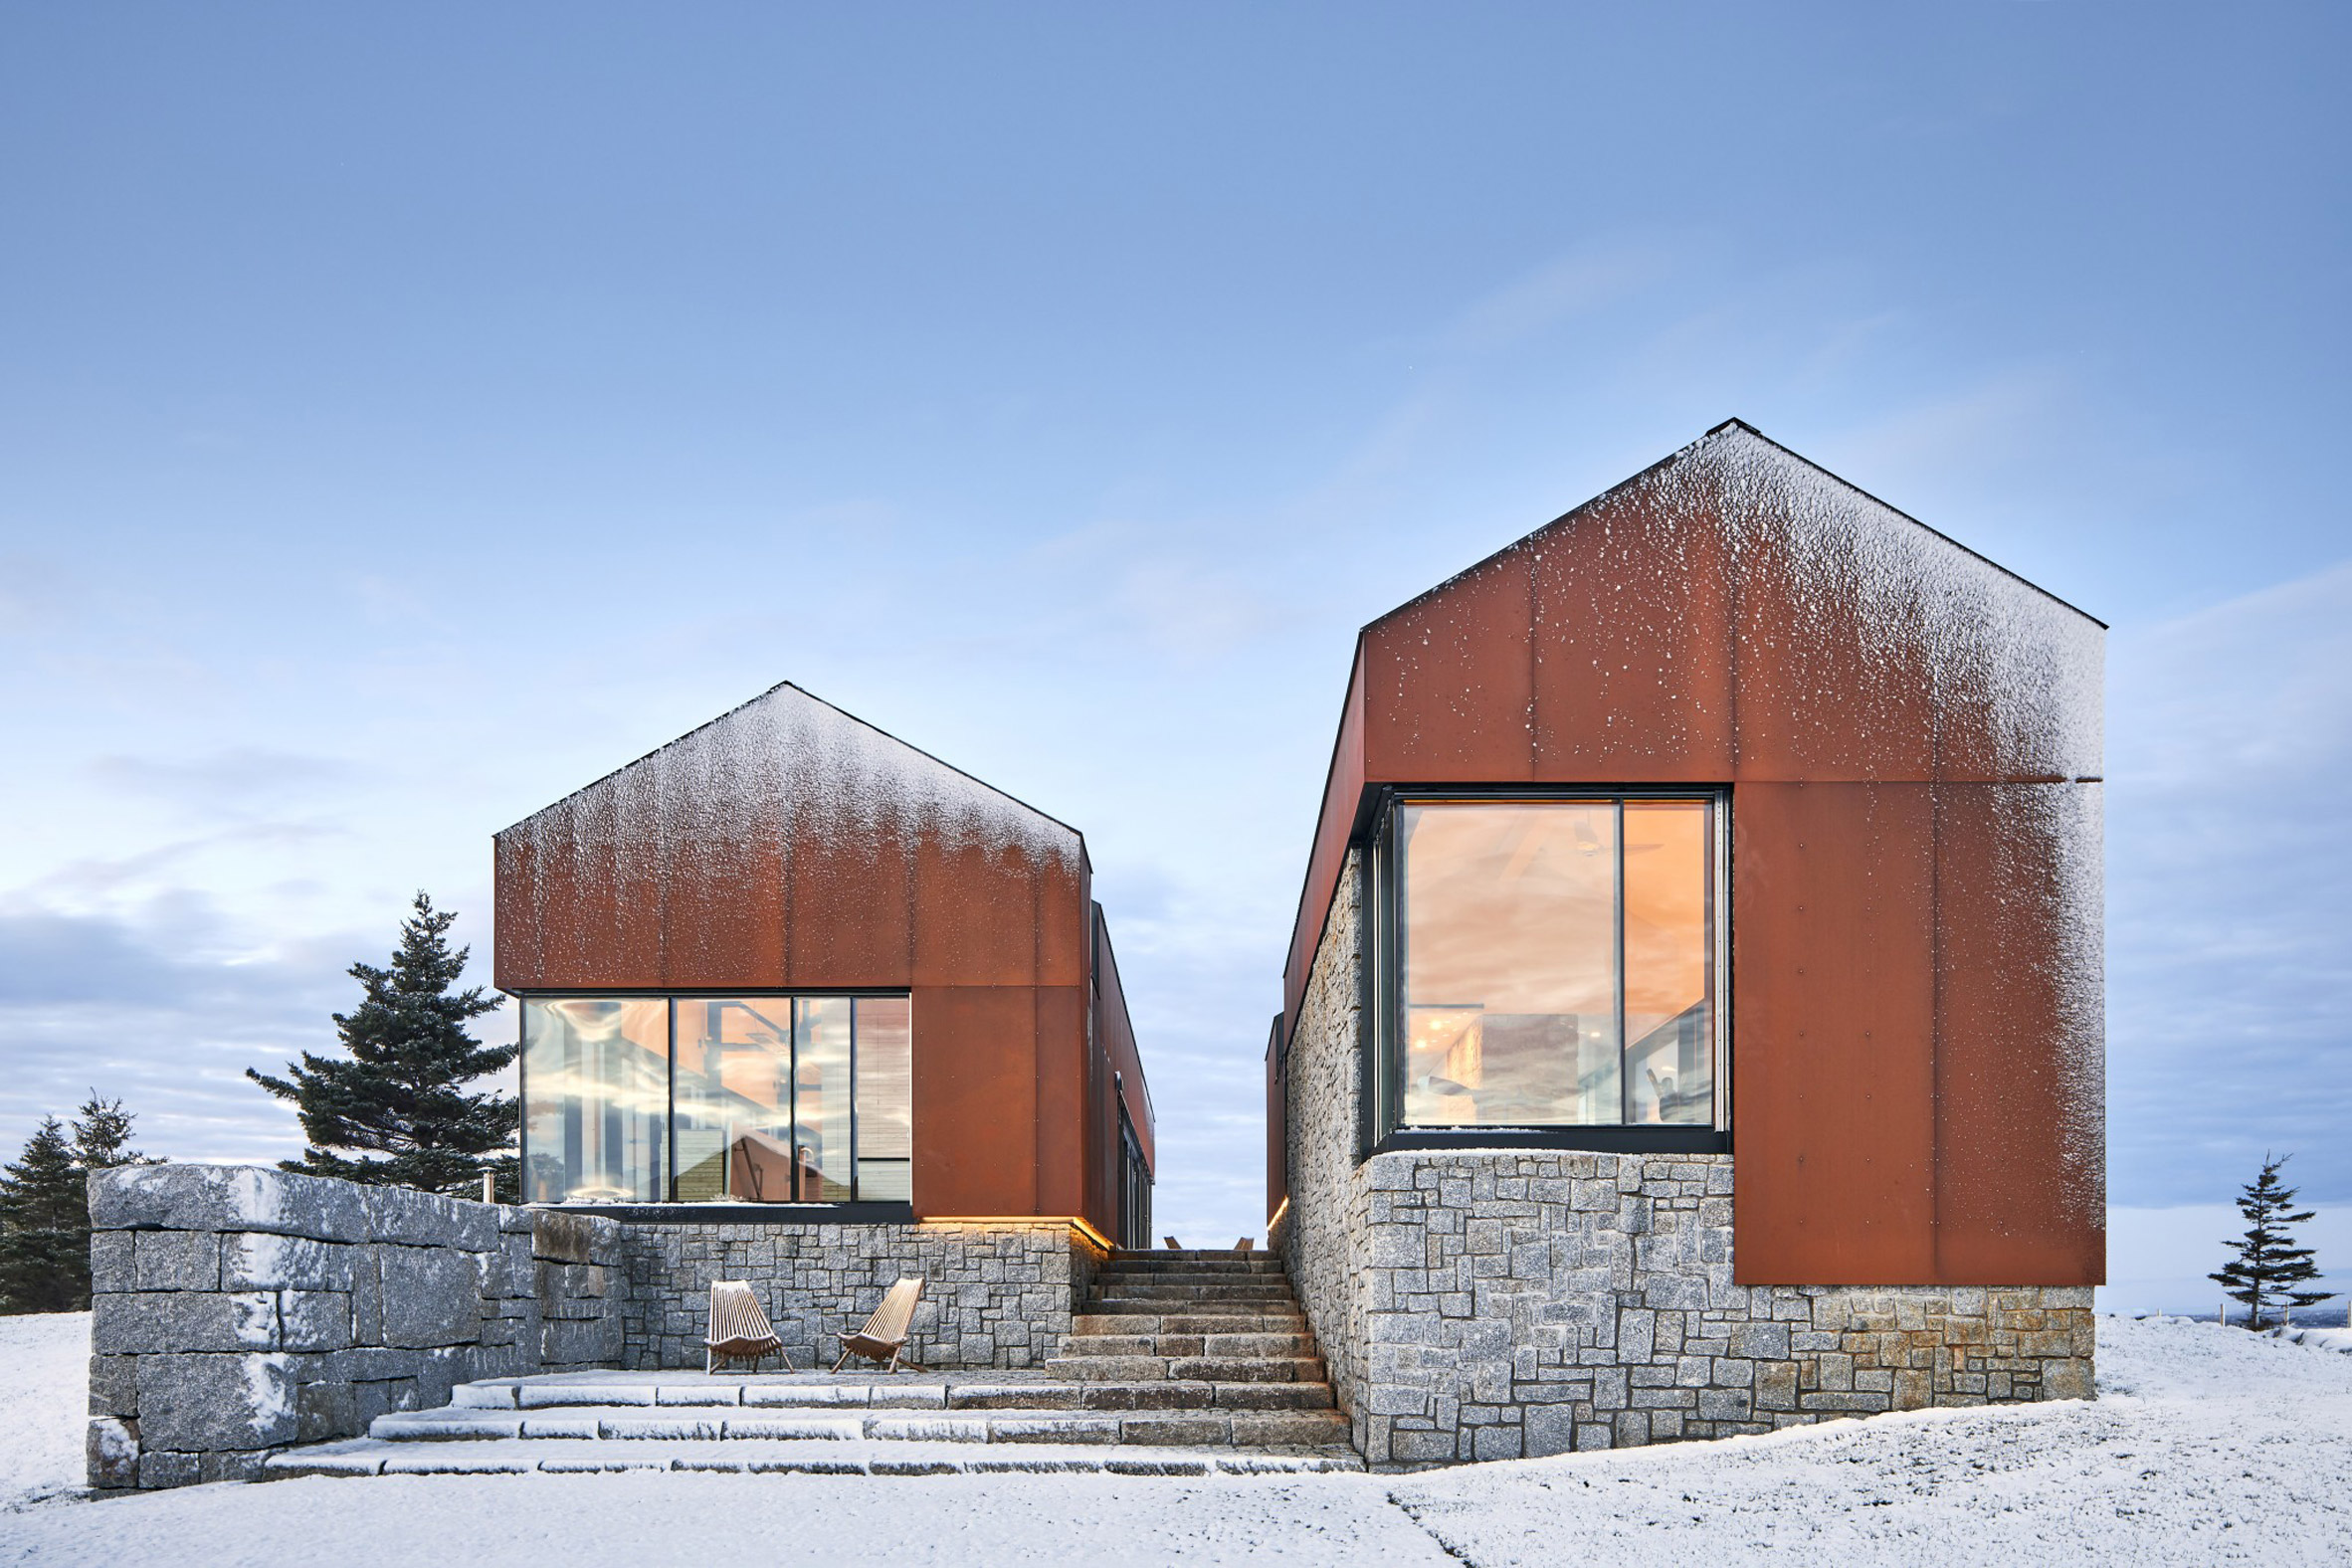 Smith Residence by MacKay-Lyons Sweetapple is a "village" of gabled steel structures